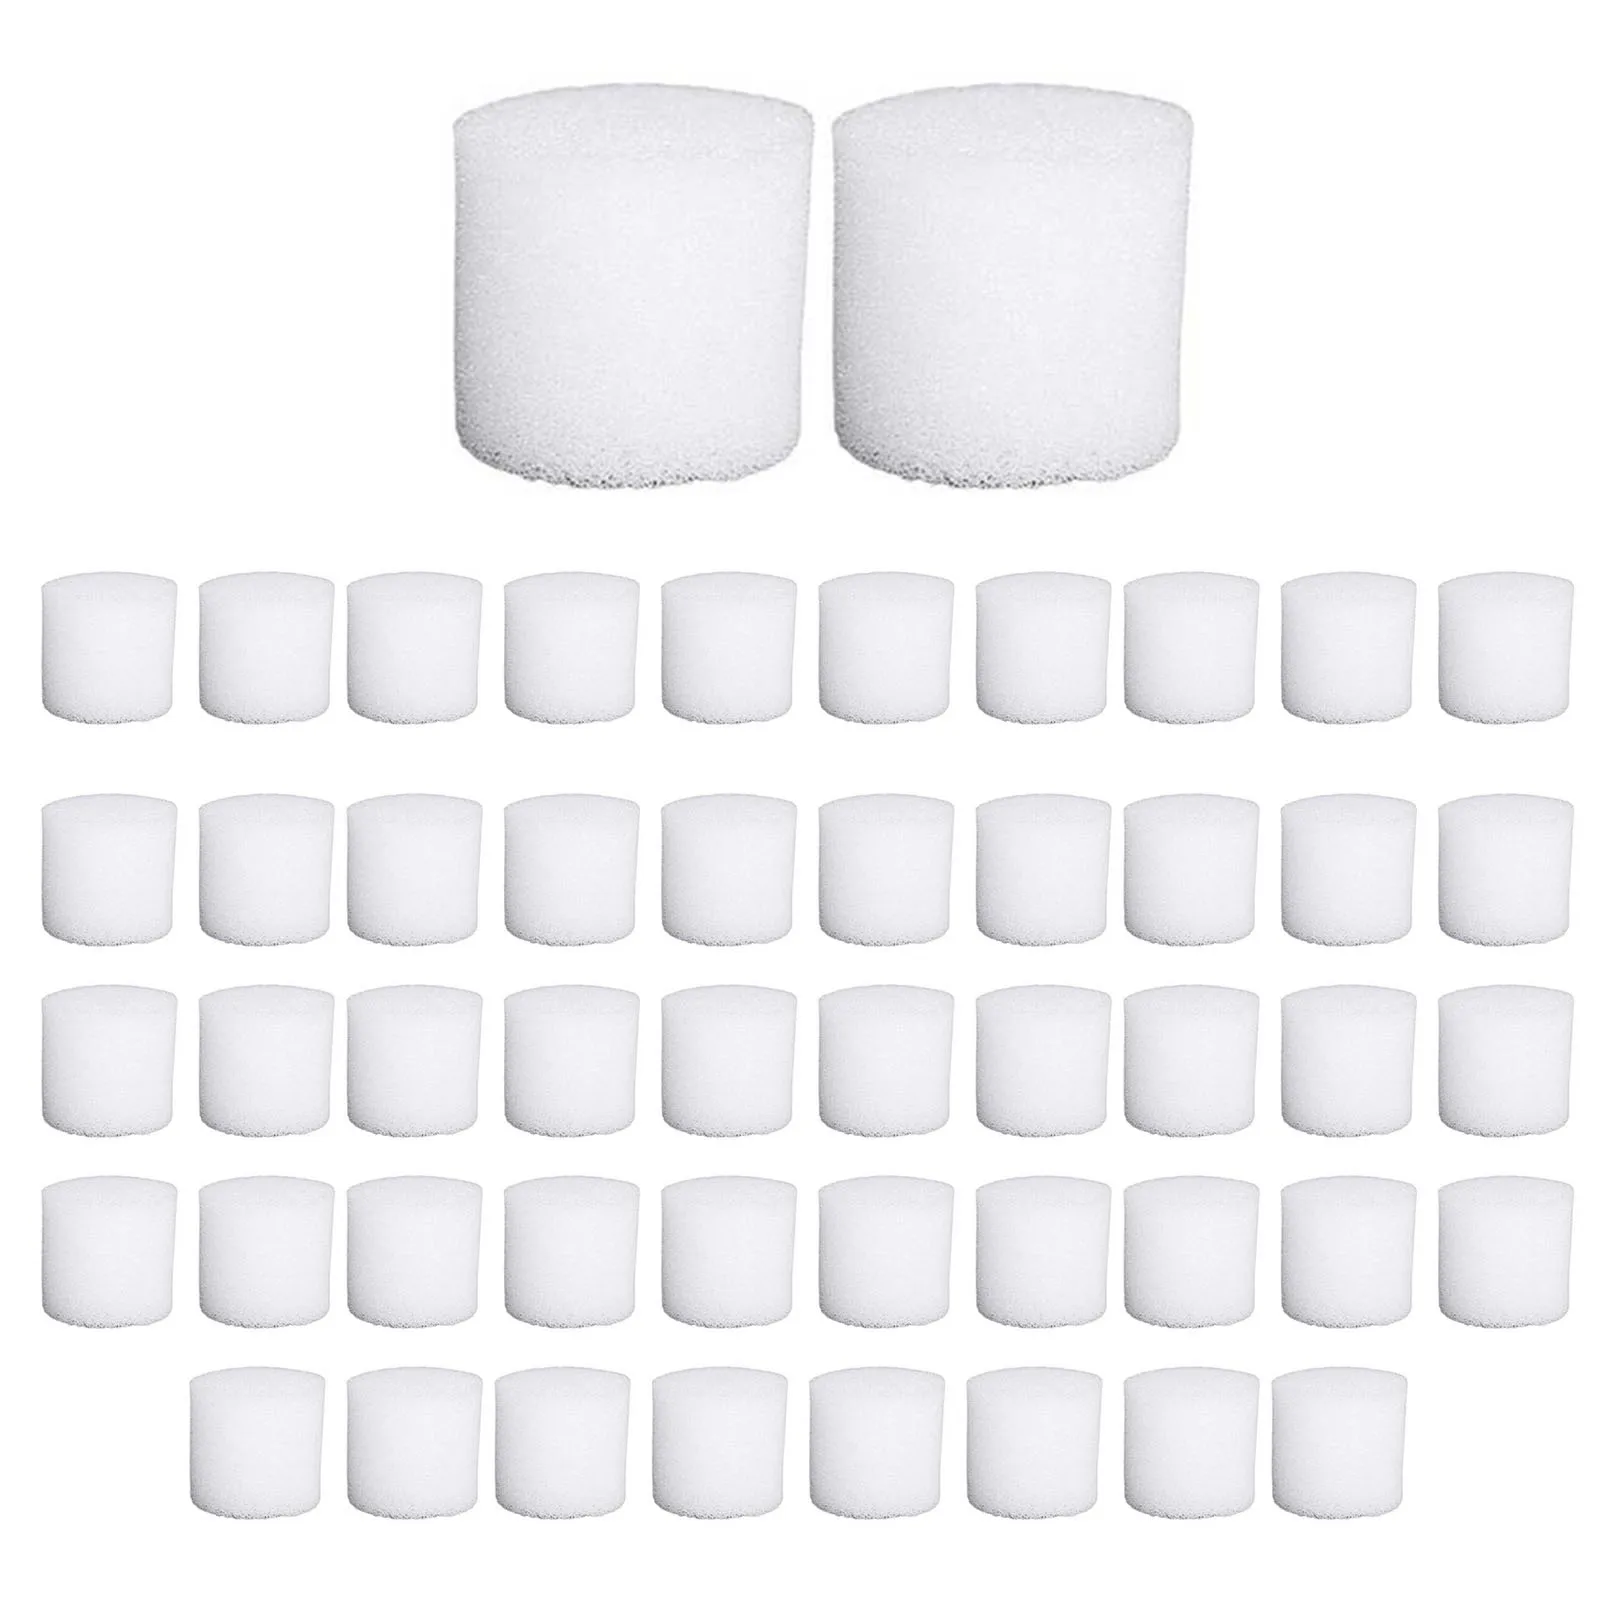 

Sustainable Gardening Solution 50PCS Soilless Hydroponics Sponge Tray Easy to Use for Various Types of Crops